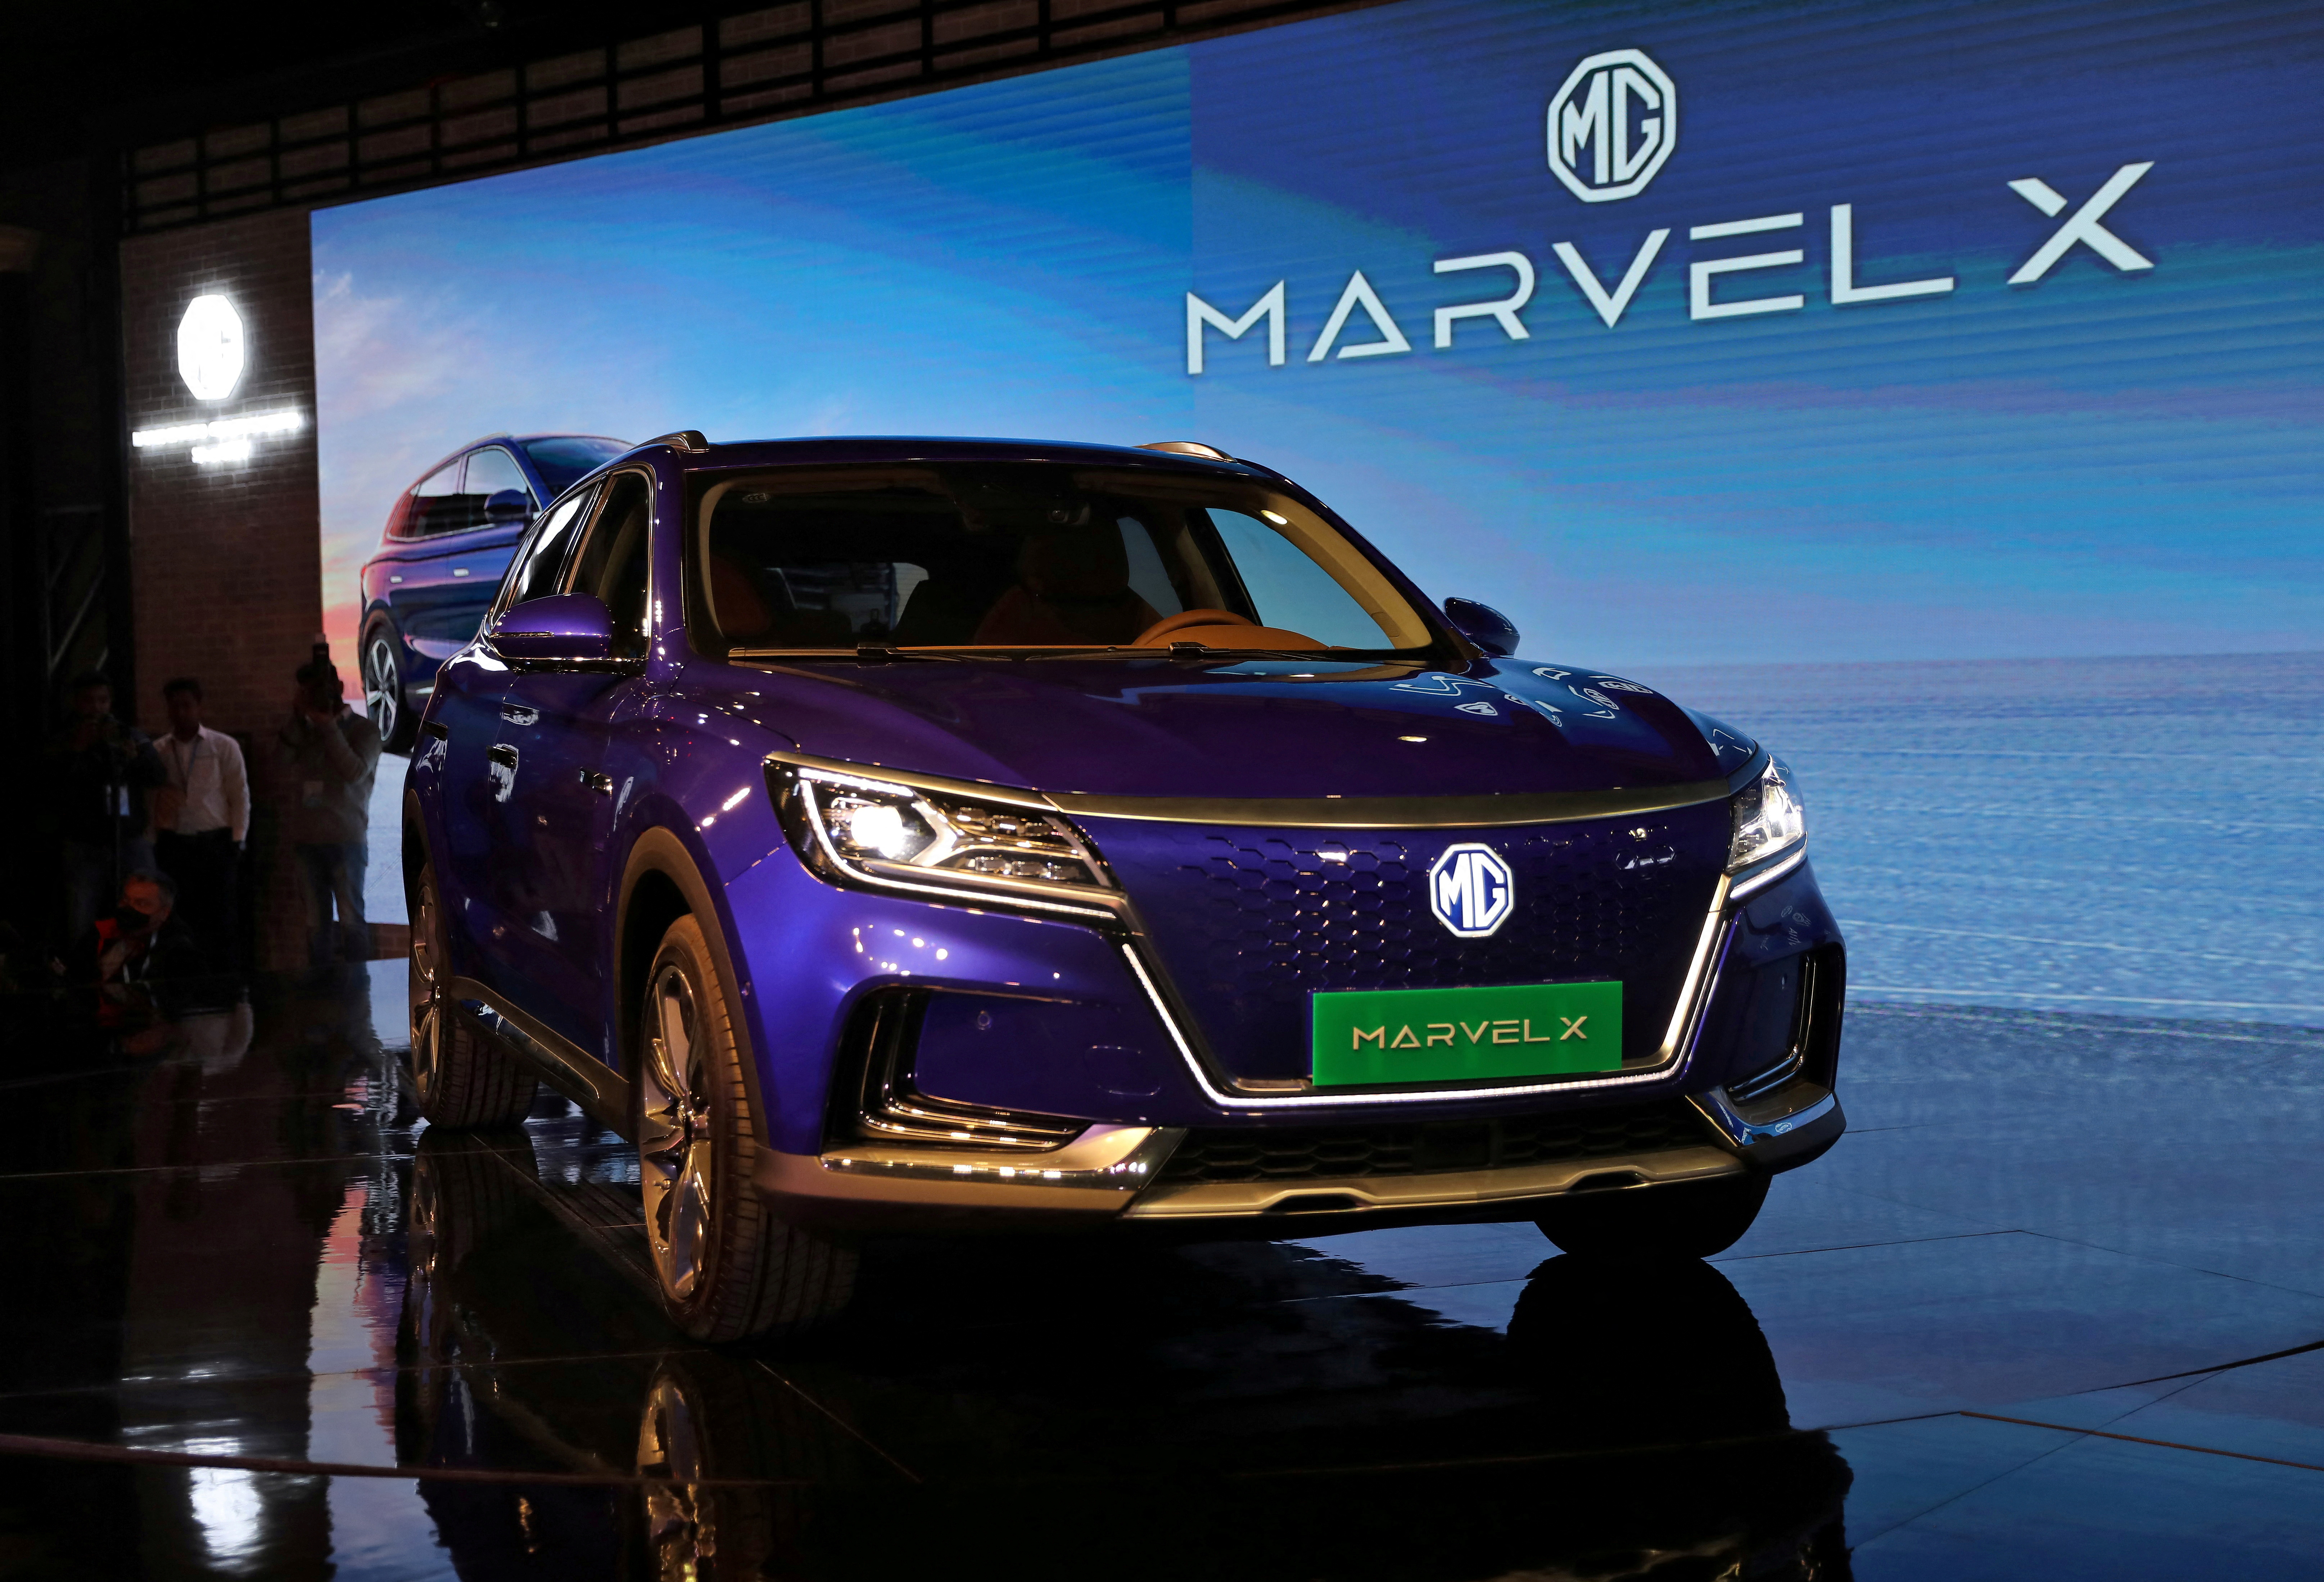 MG Motors Marvel X electric SUV is on display after it was unveiled at the India Auto Expo 2020 in Greater Noida